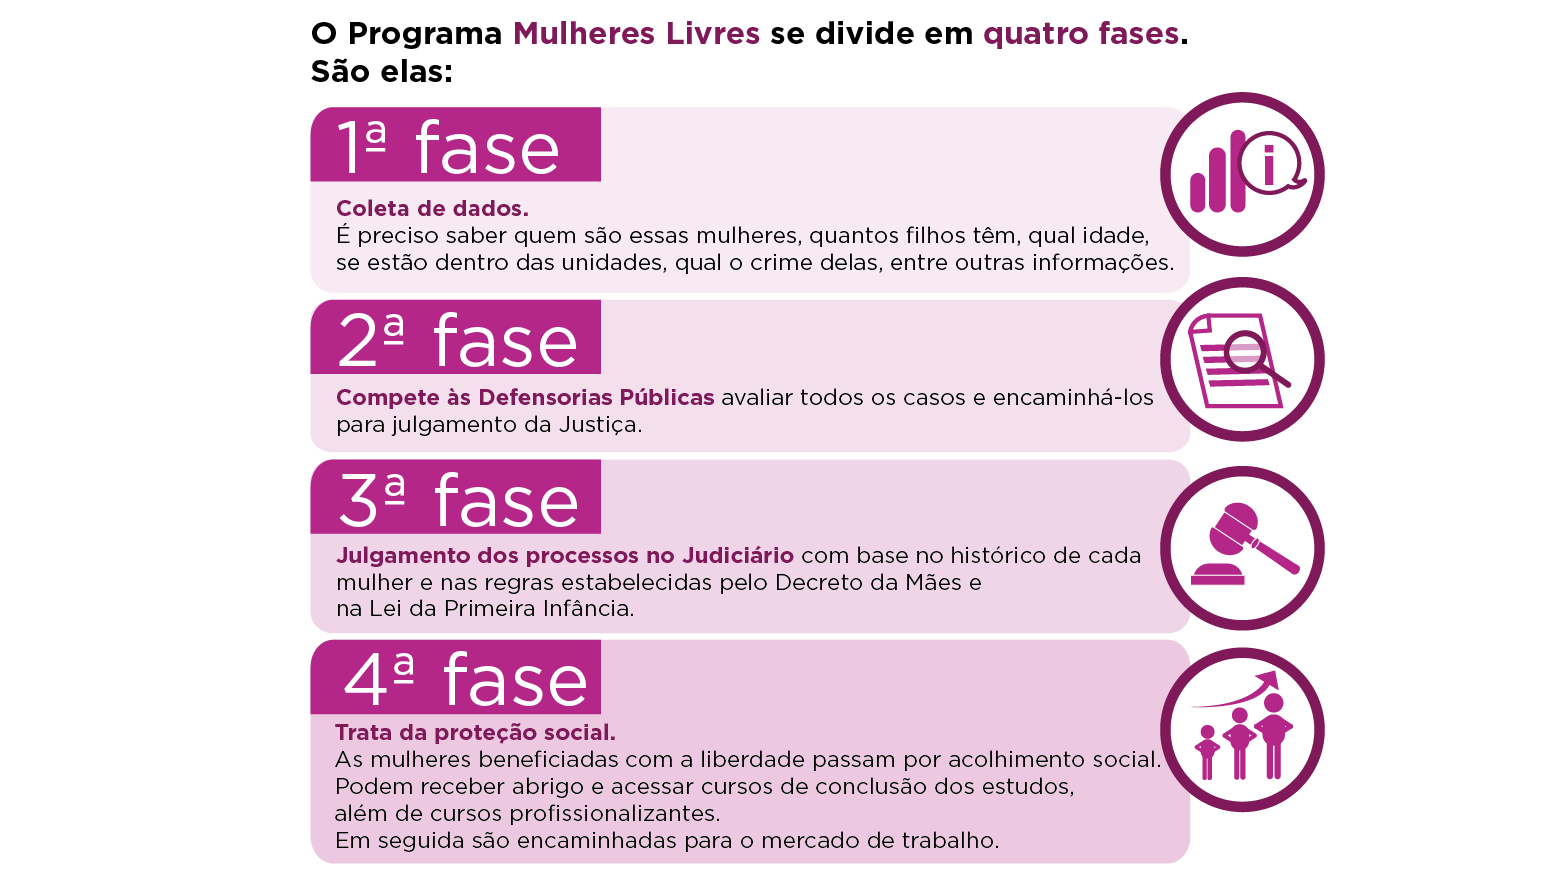 Fases Mulheres Livres